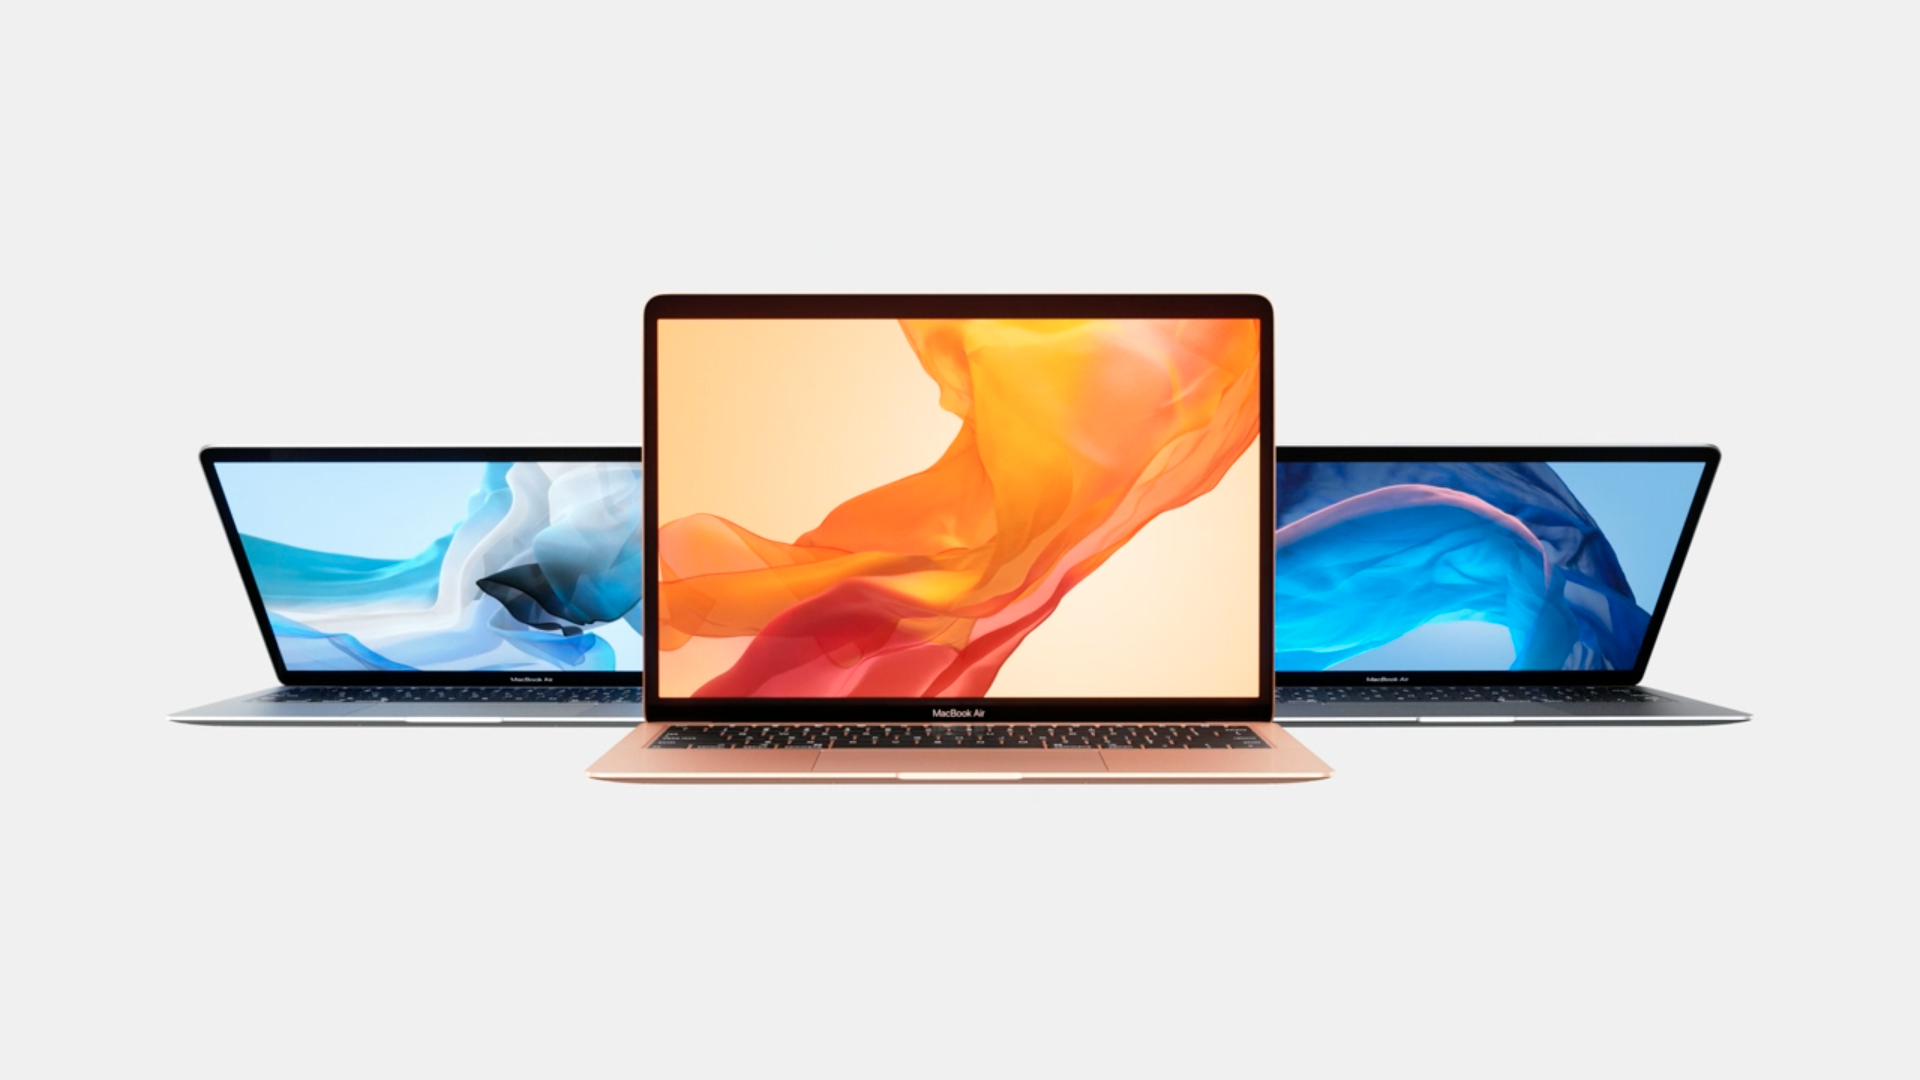 Retina, TouchID and reduced dimensions, the MacBook Air gets a makeover